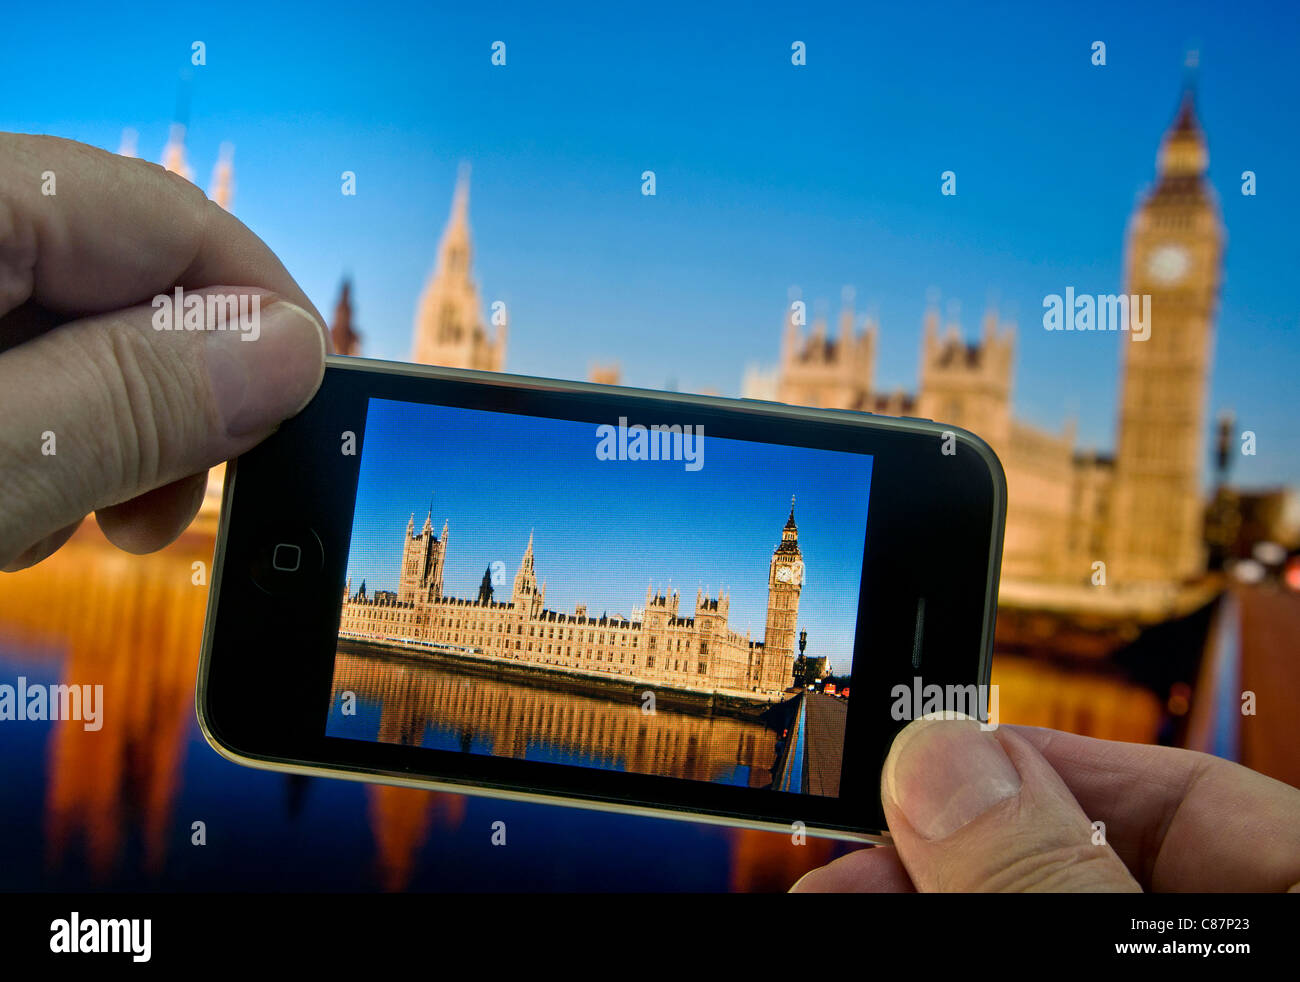 SMARTPHONE PHOTOGRAPHY PHOTO SCREEN IMAGE hands holding and taking a still / movie clip of the Houses of Parliament Westminster London UK Stock Photo